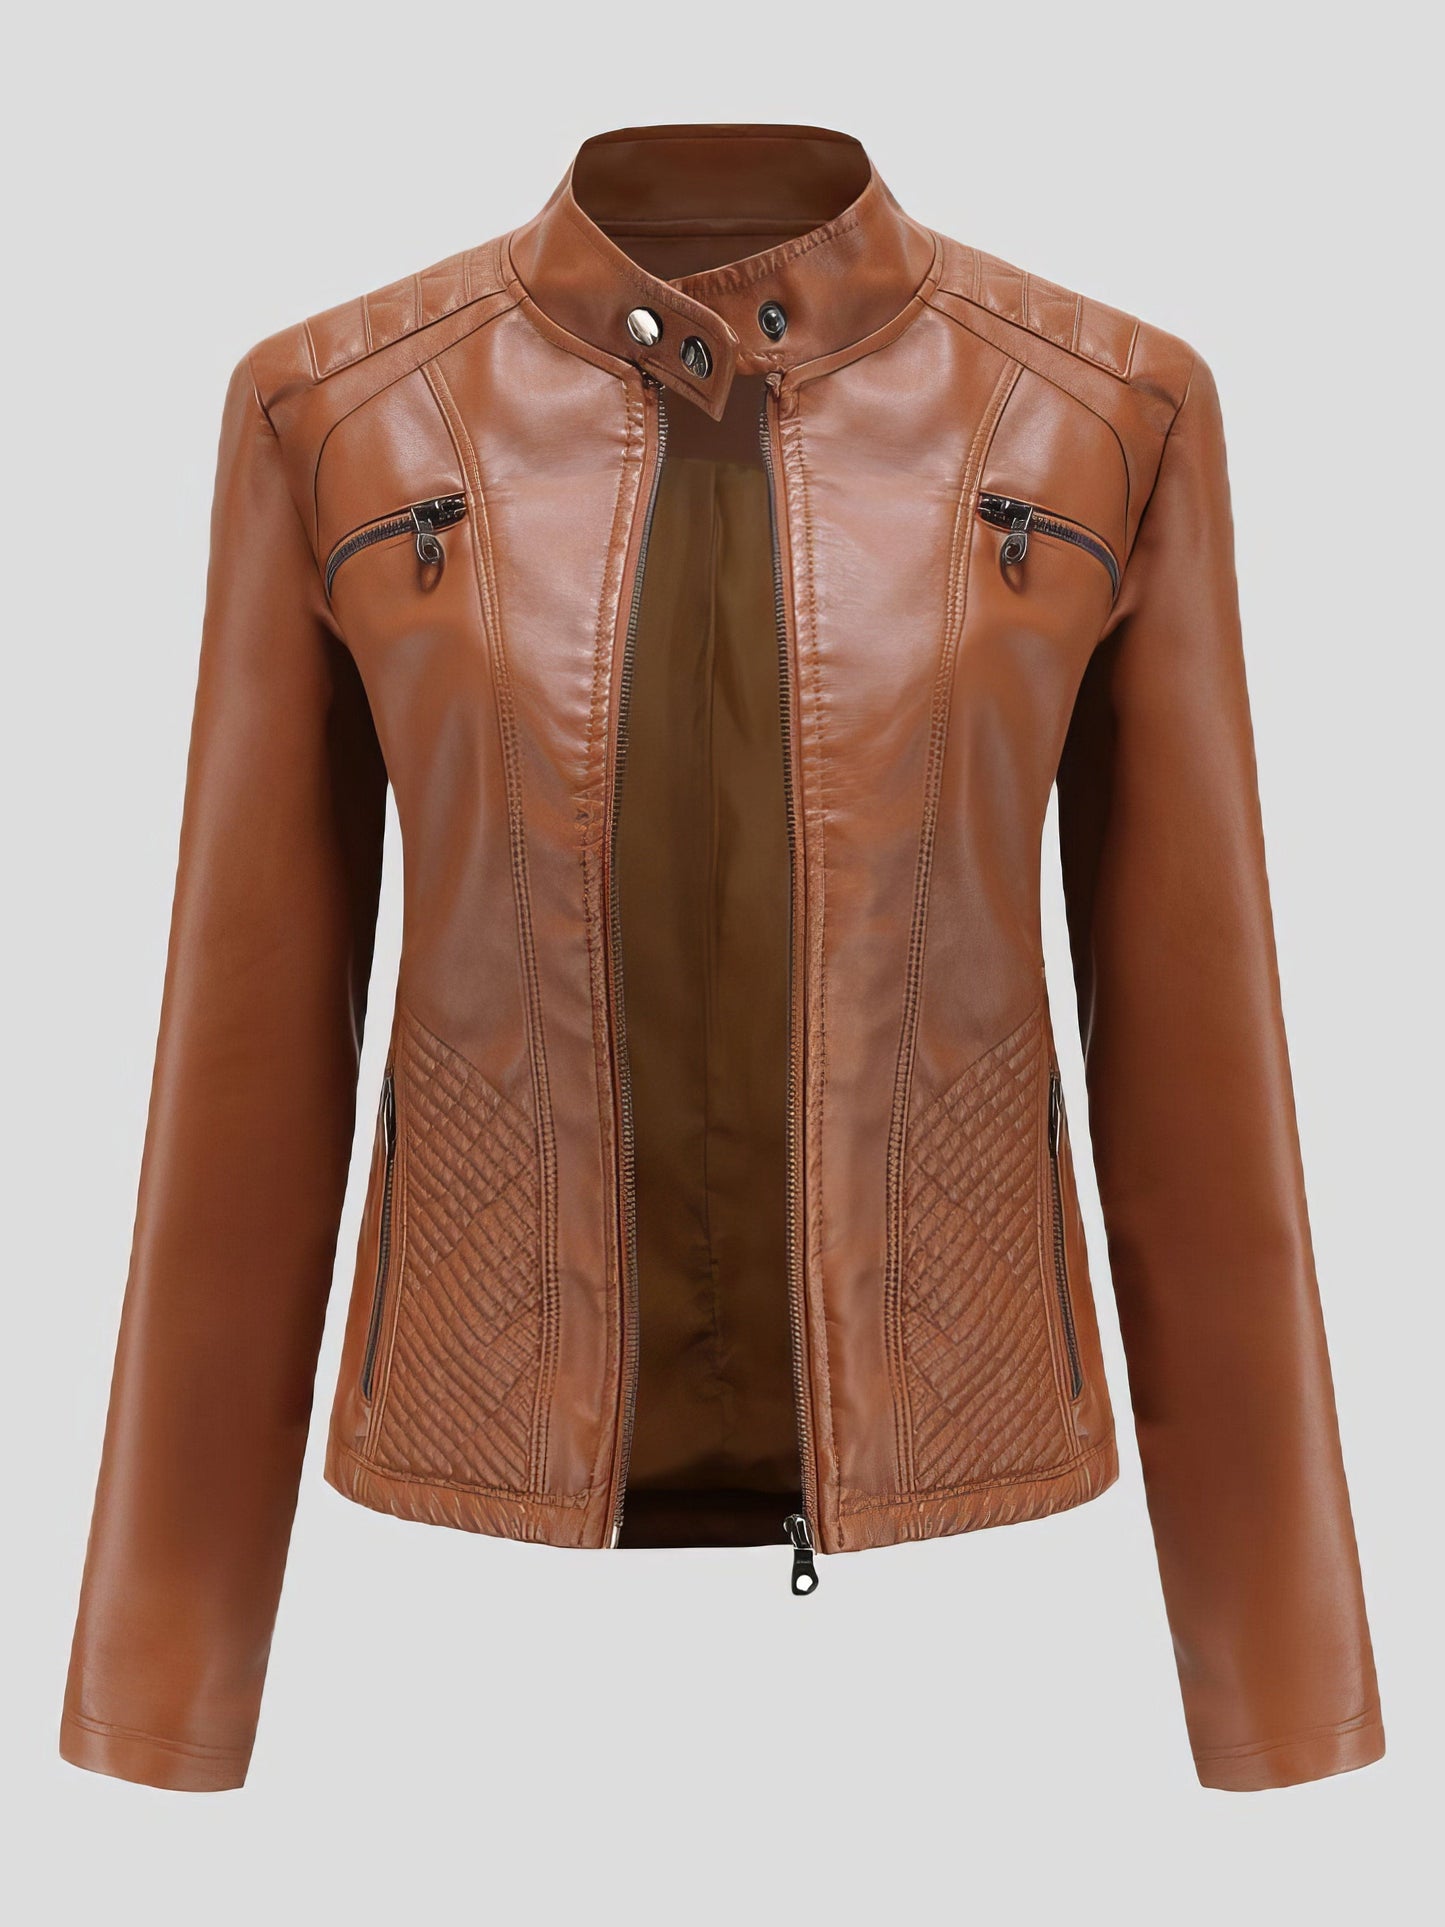 Casual Stand-Collar Slim Solid Leather Jacket JAC2108261129CAMS Brown / 2 (S)